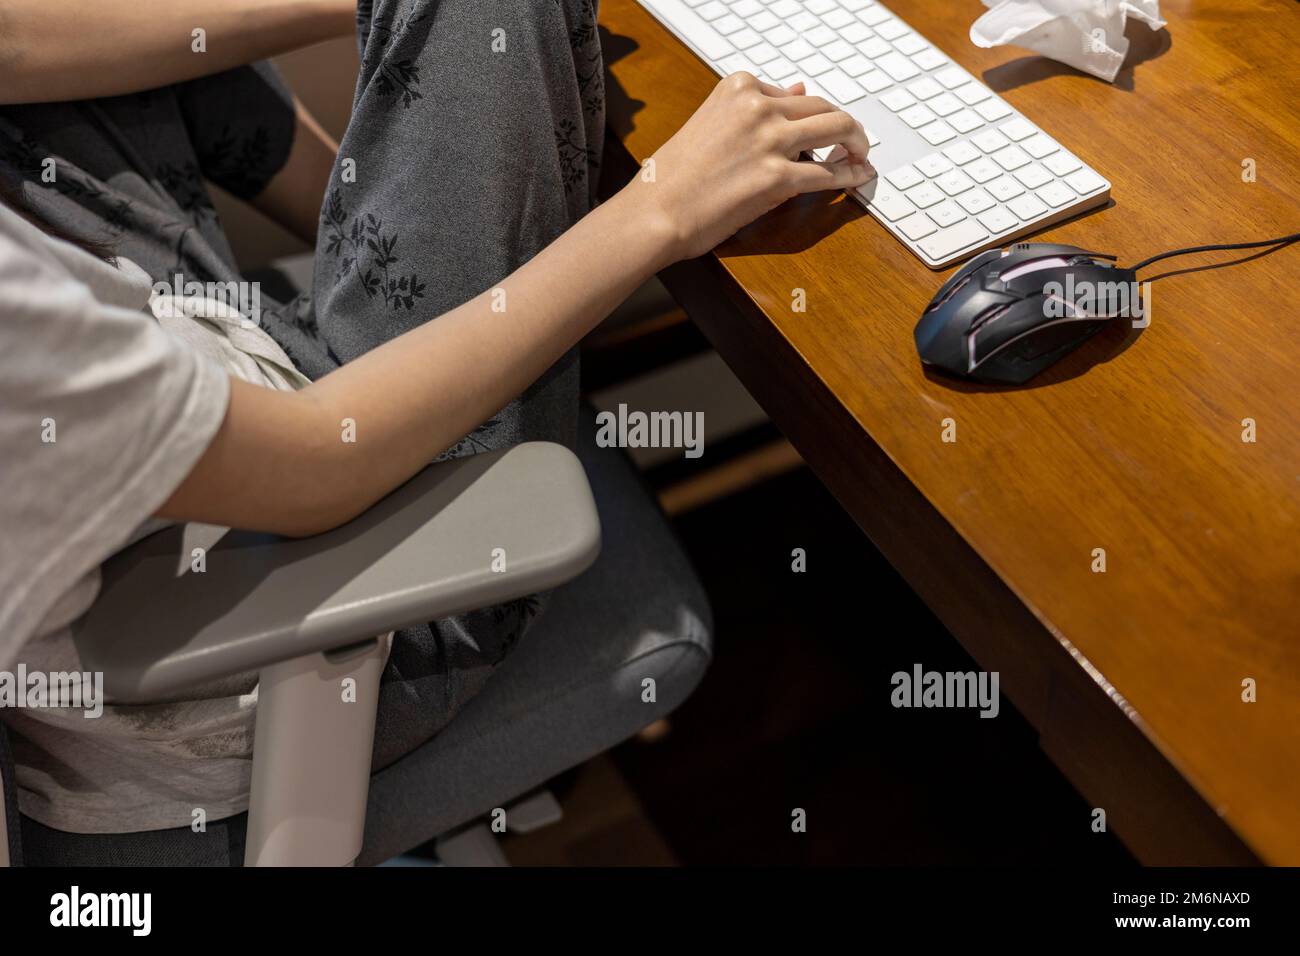 Woman is using a computer with a bad posture Stock Photo